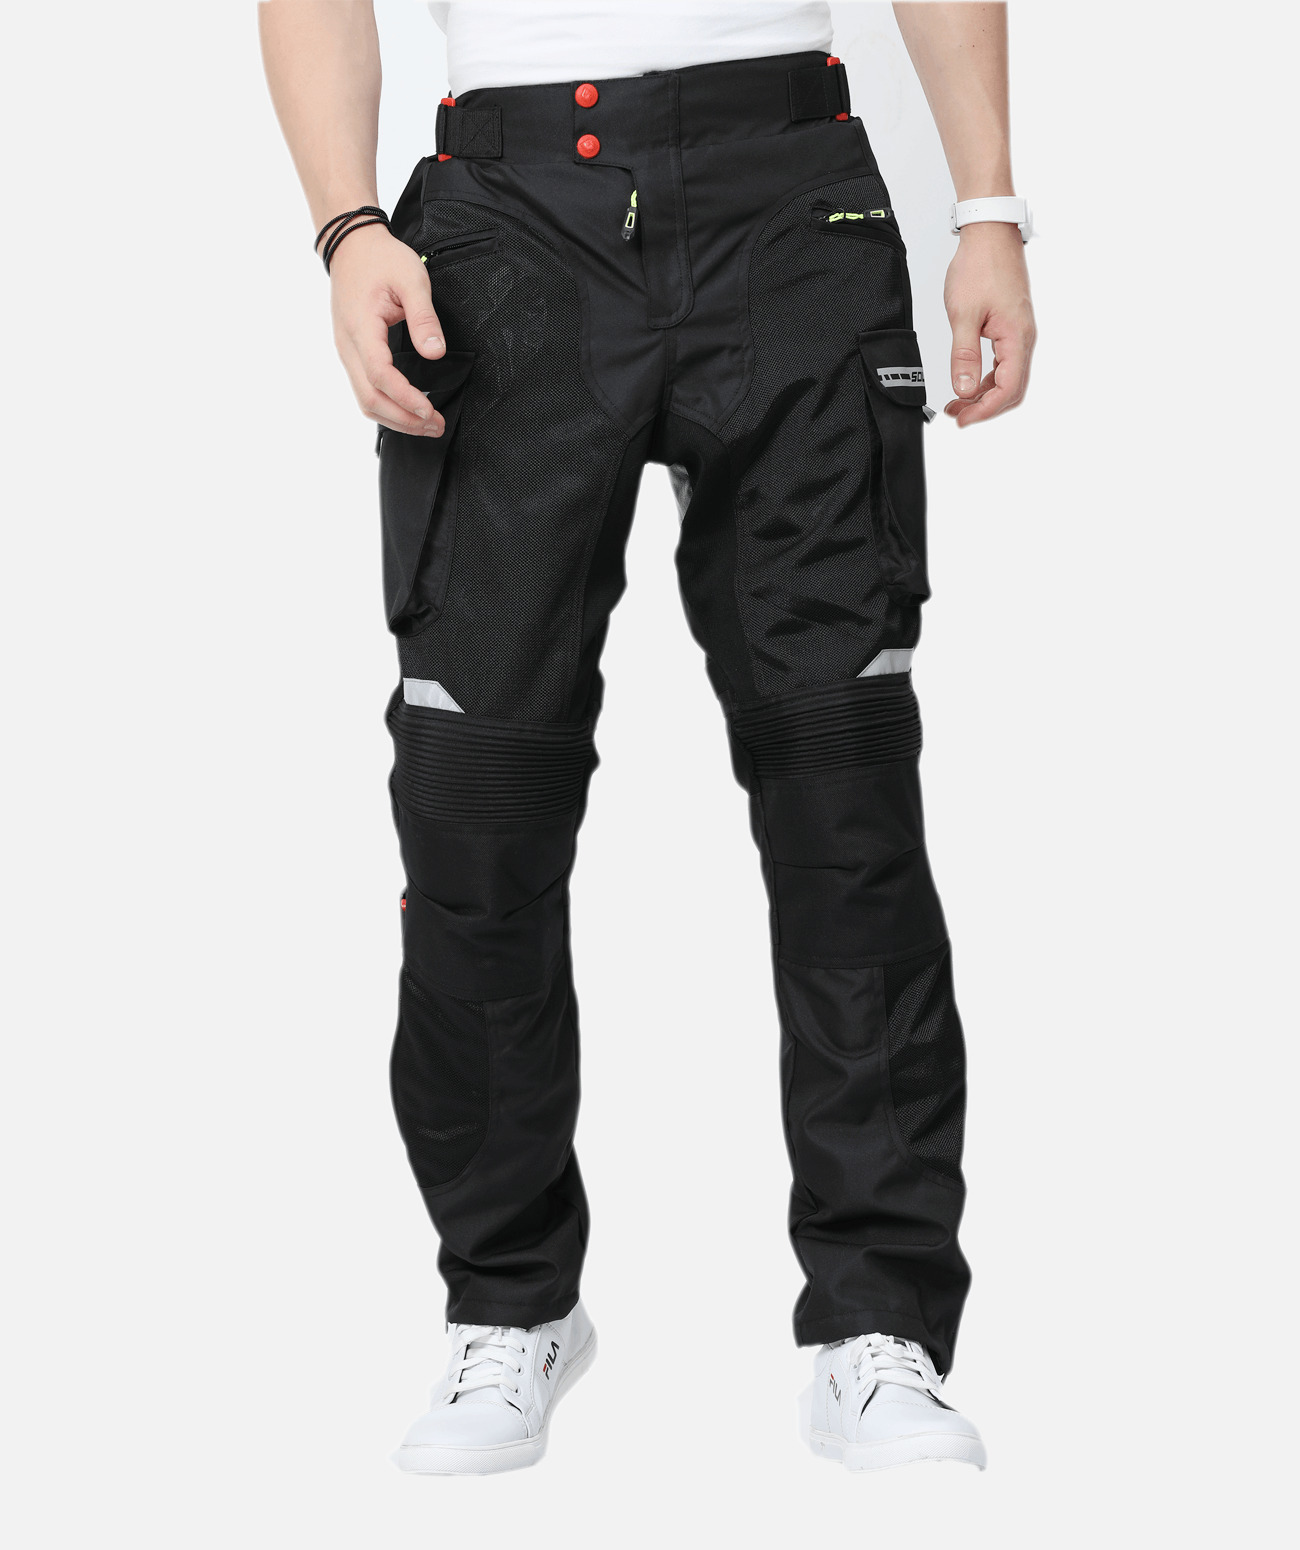 Mens Motorcycle Cargo Pants With Side Pockets On Sale - Rugged